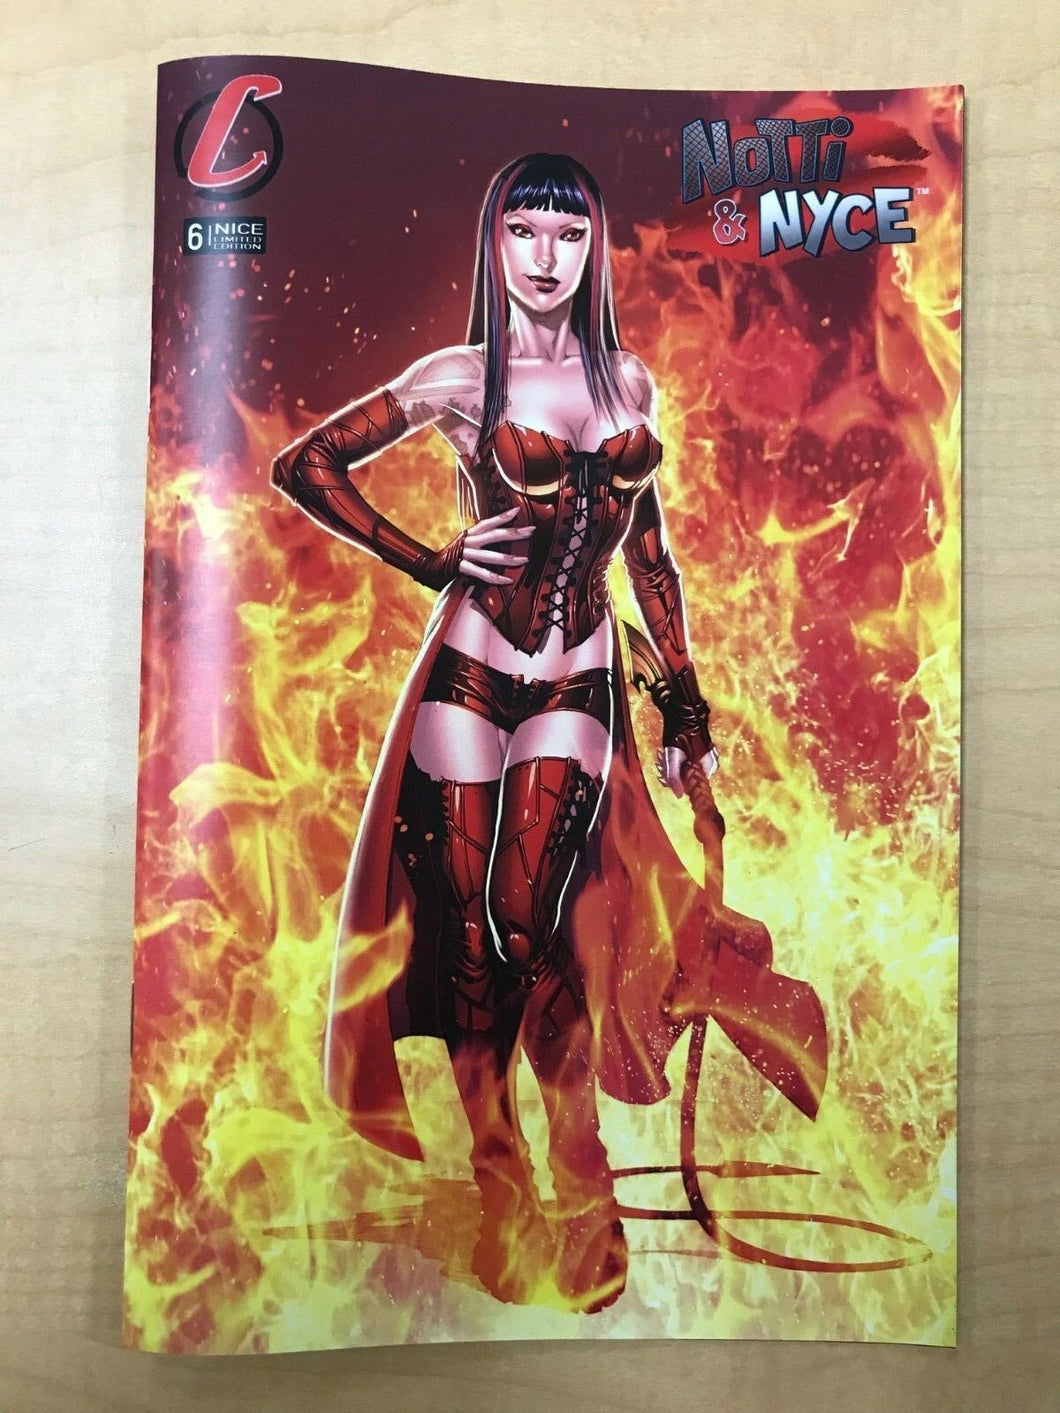 Notti & Nyce #6 Jose Varese NAUGHTY Variant Cover Counterpoint Comics SOLD OUT